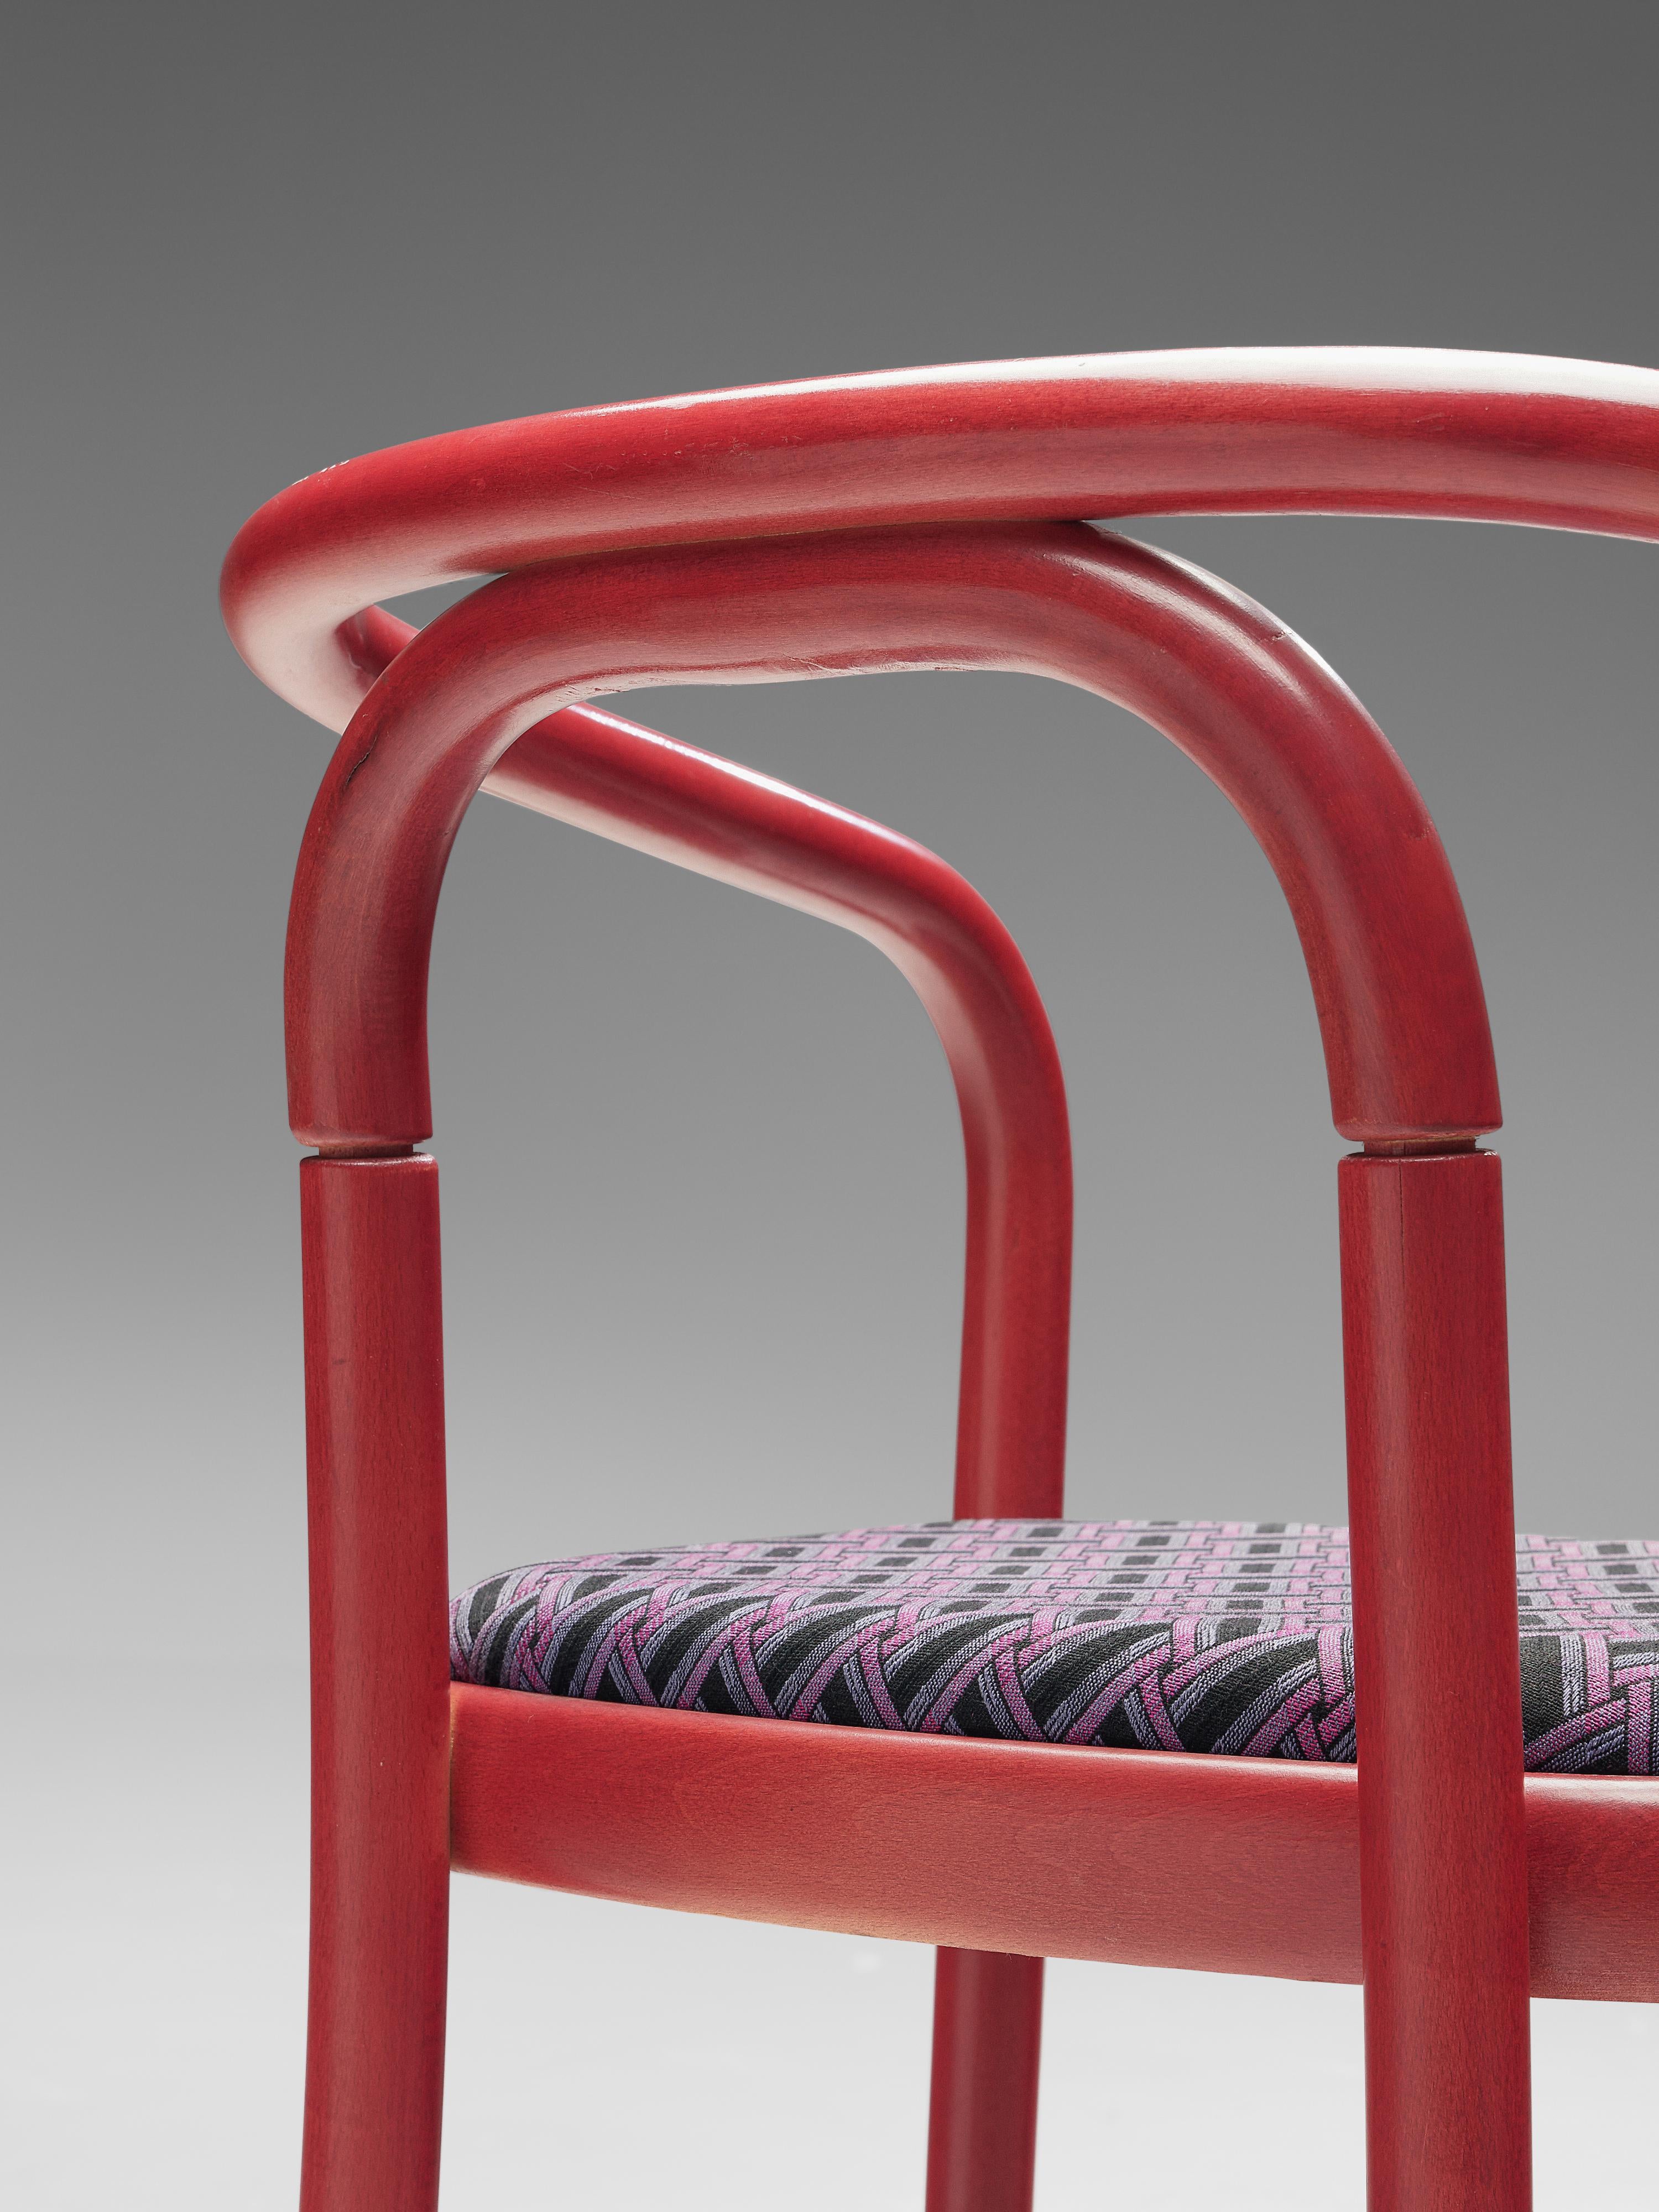 Antonin Suman for TON Dining Chairs with Red Wooden Frames